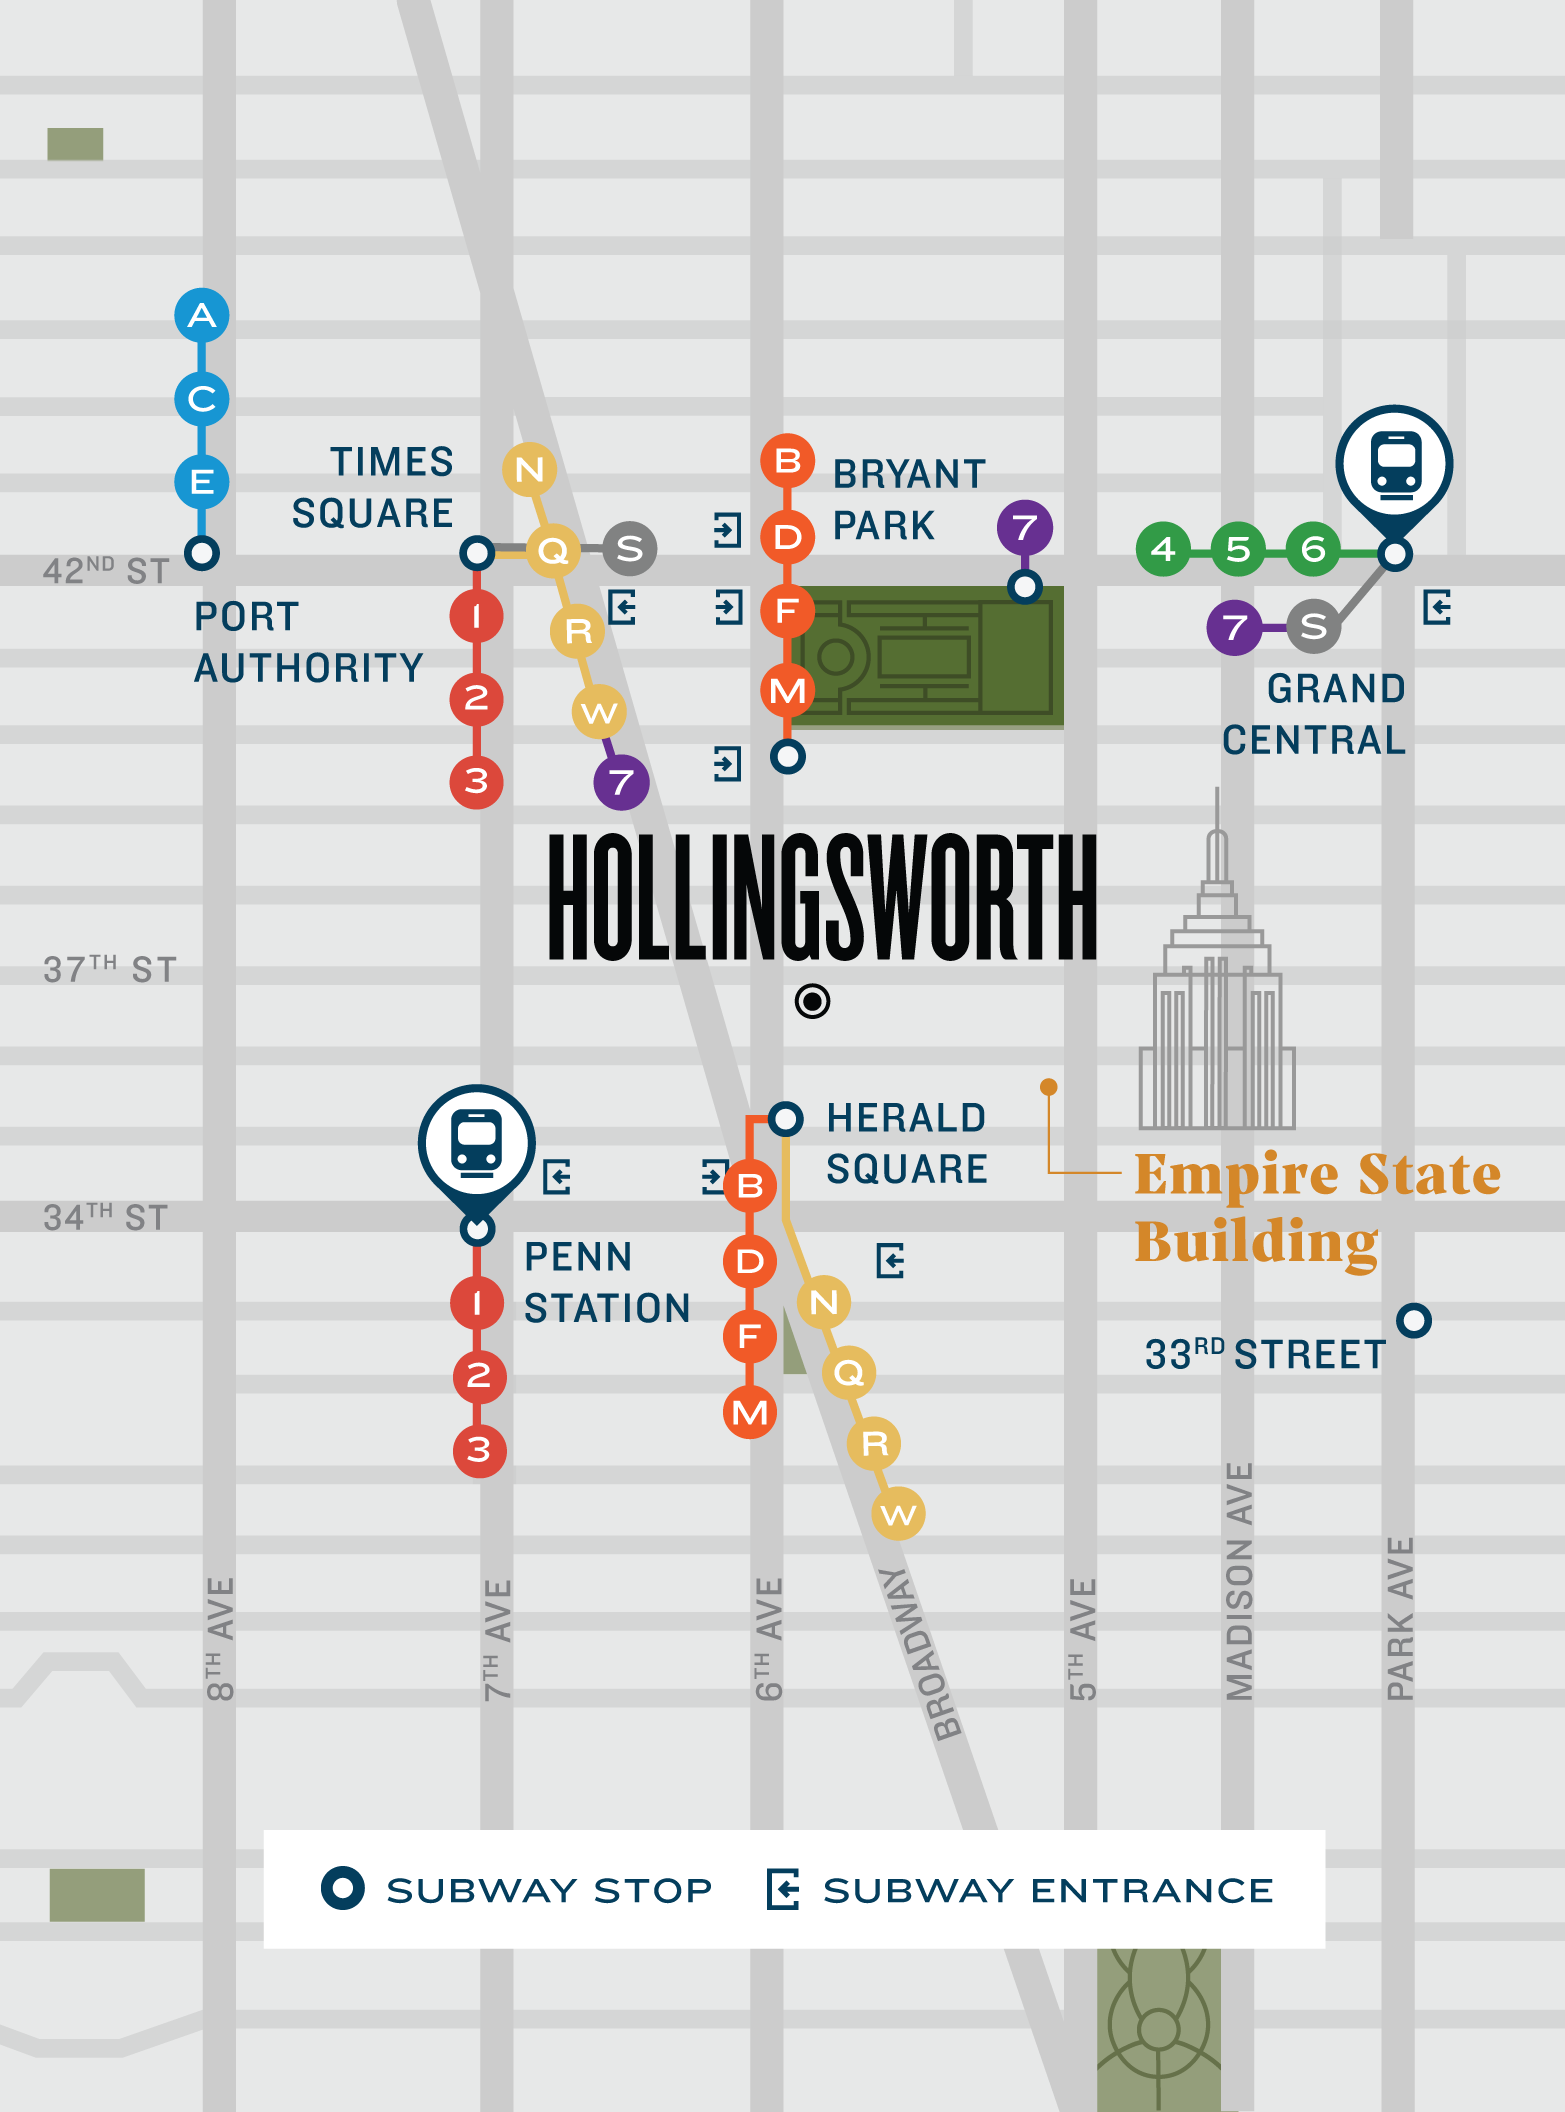 Mobile-Friendly Map Highlighting Where Hollingsworth Is in Relation to Iconic Location in NYC